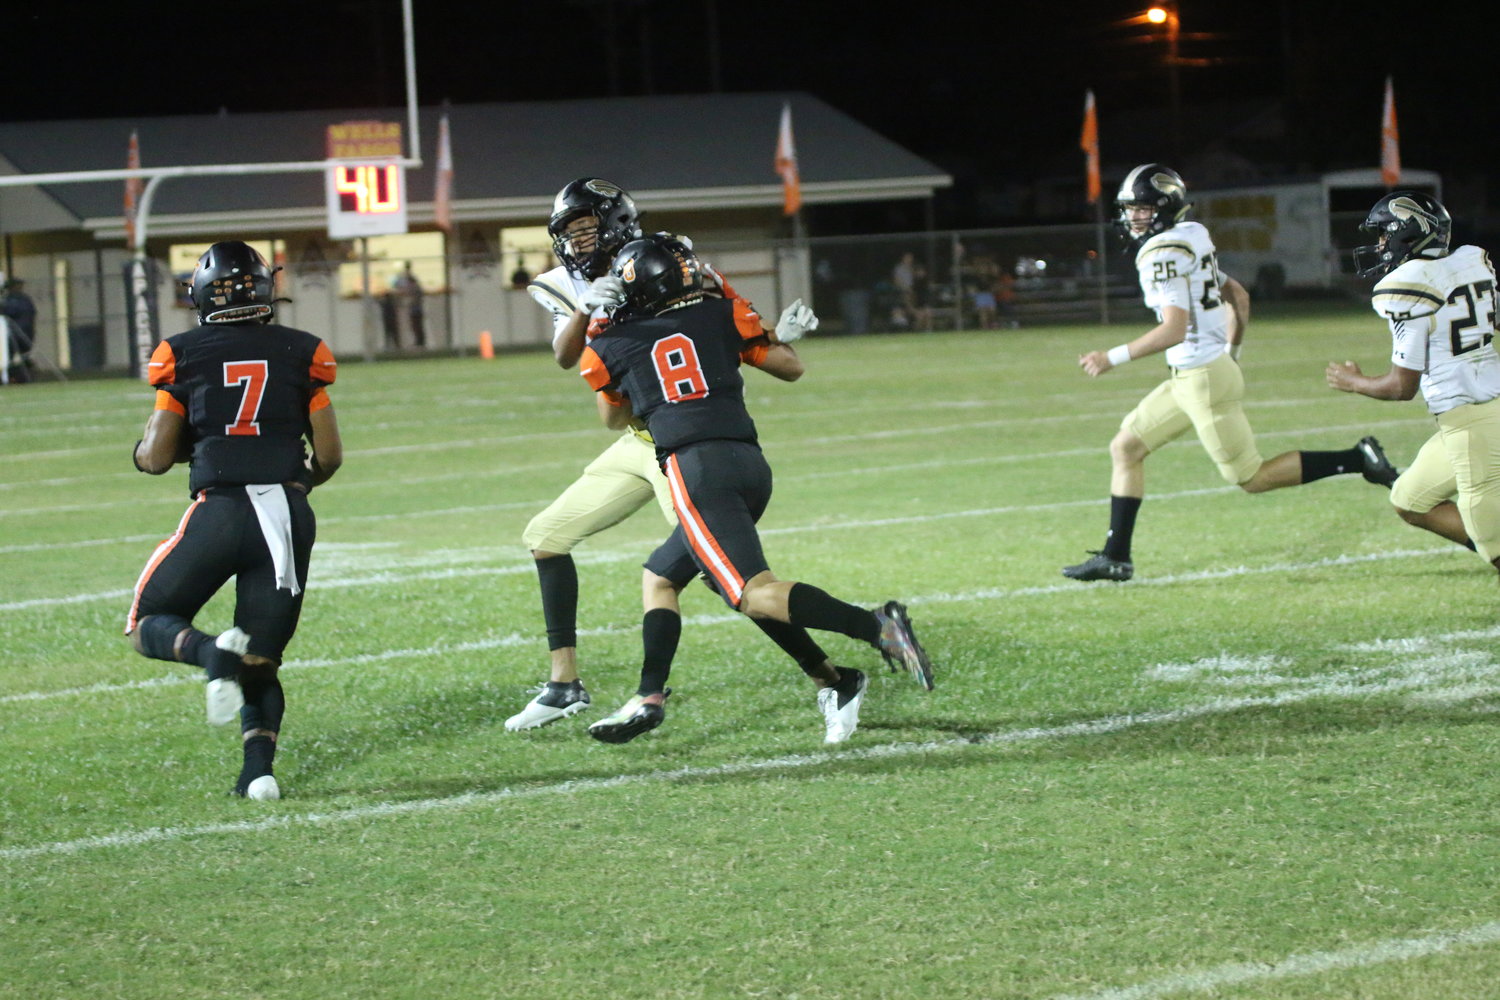 Quarterback Jarren Johnson (7) hits the outside on a keeper for 24 yards with blocking help from Carson Gaytan (8).